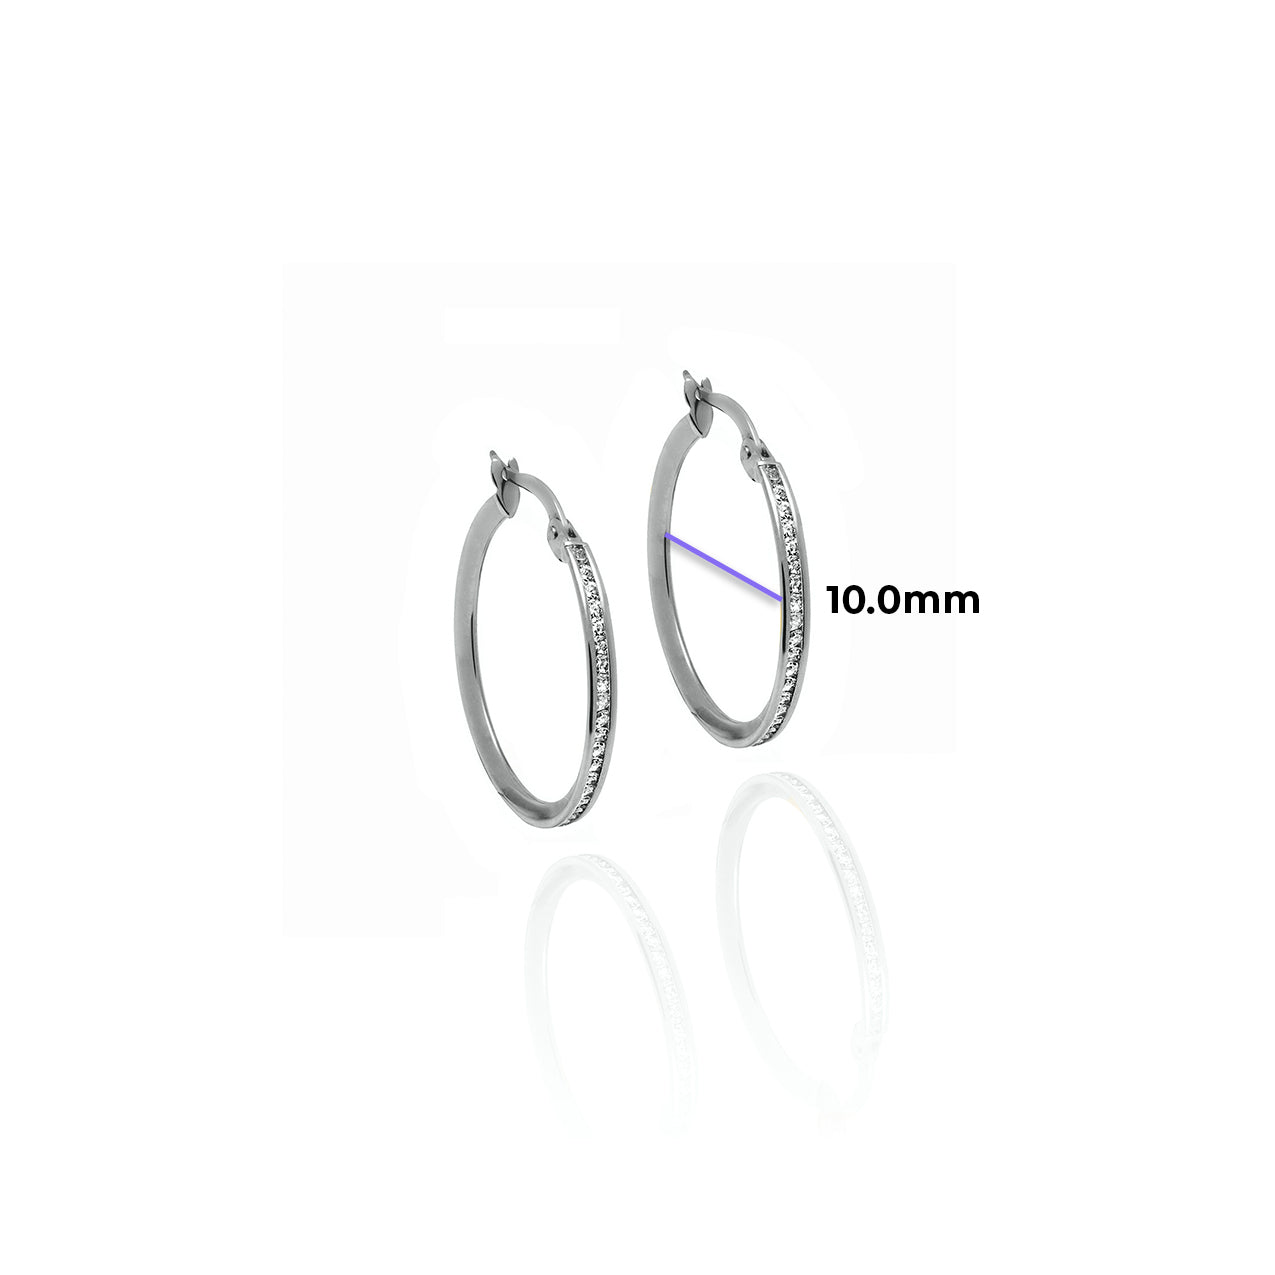 Small Crystal Hoops 2mm Width Solid Gold with Cubic Zirconia White with Measurement 10mm